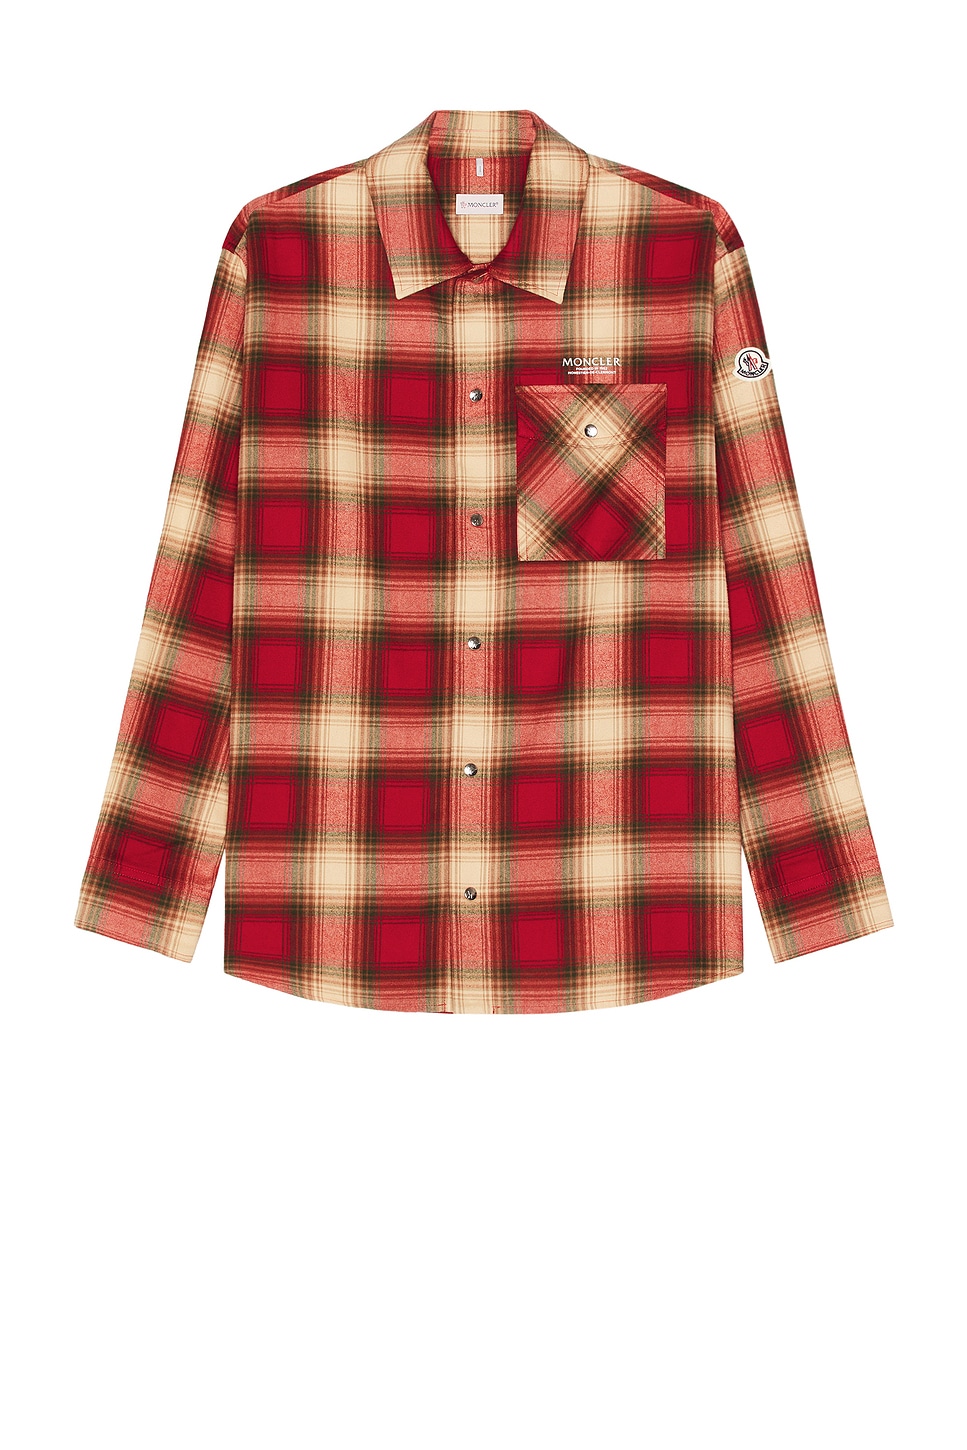 Image 1 of Moncler Long Sleeve Shirt in Plaid